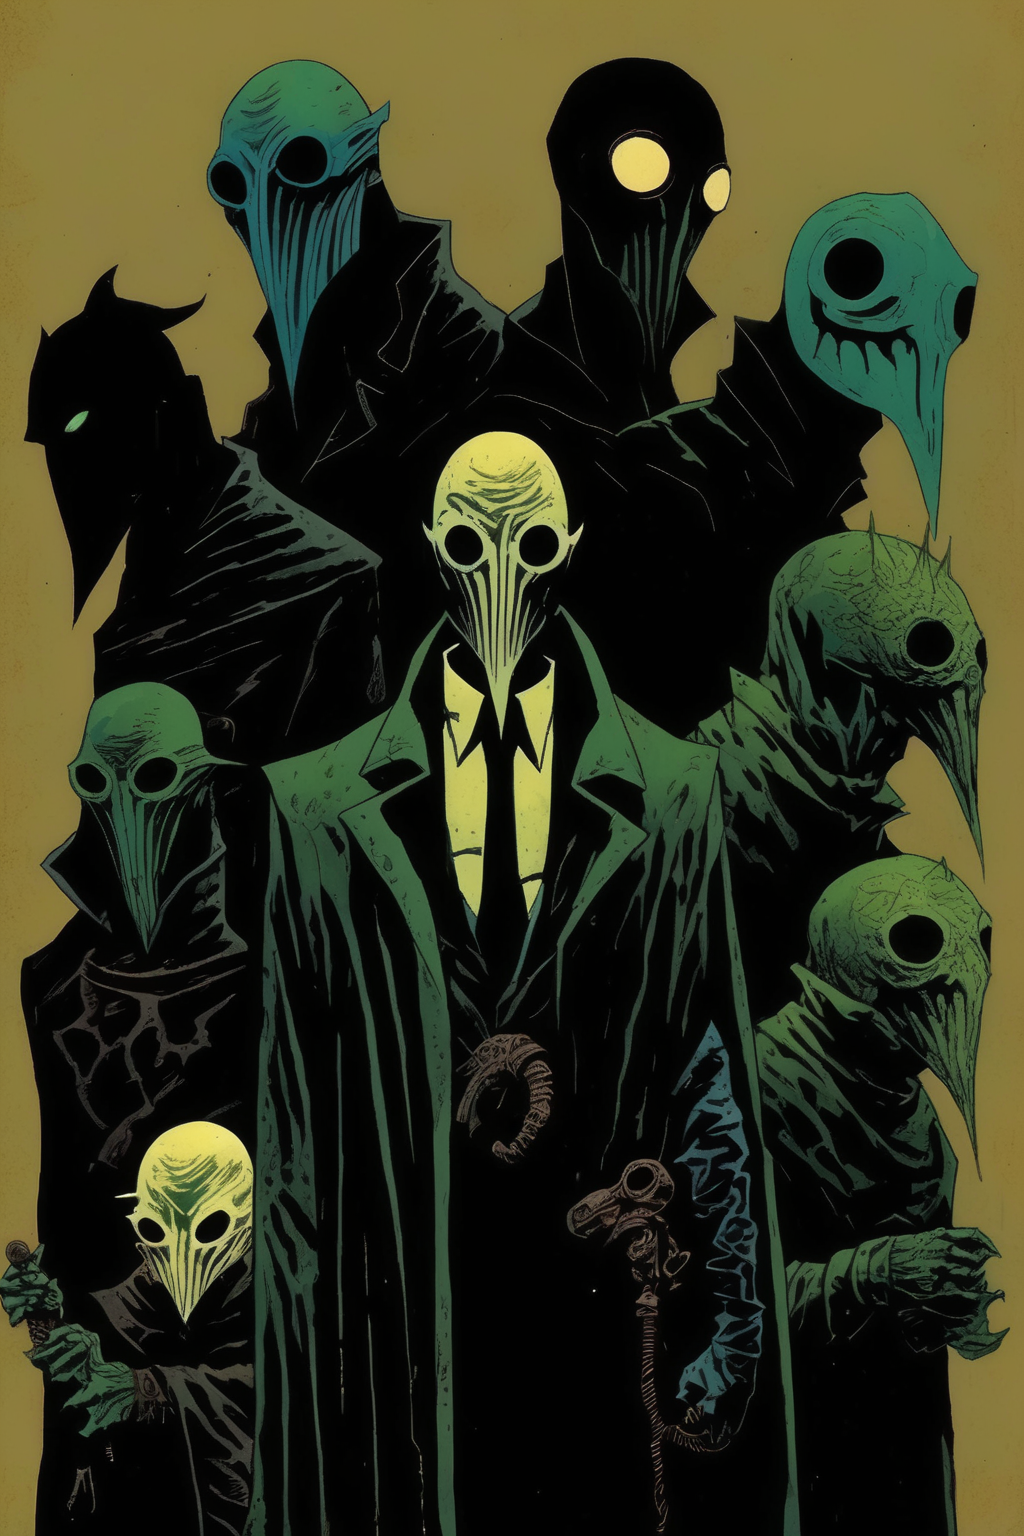 The eldritch lords of masks,